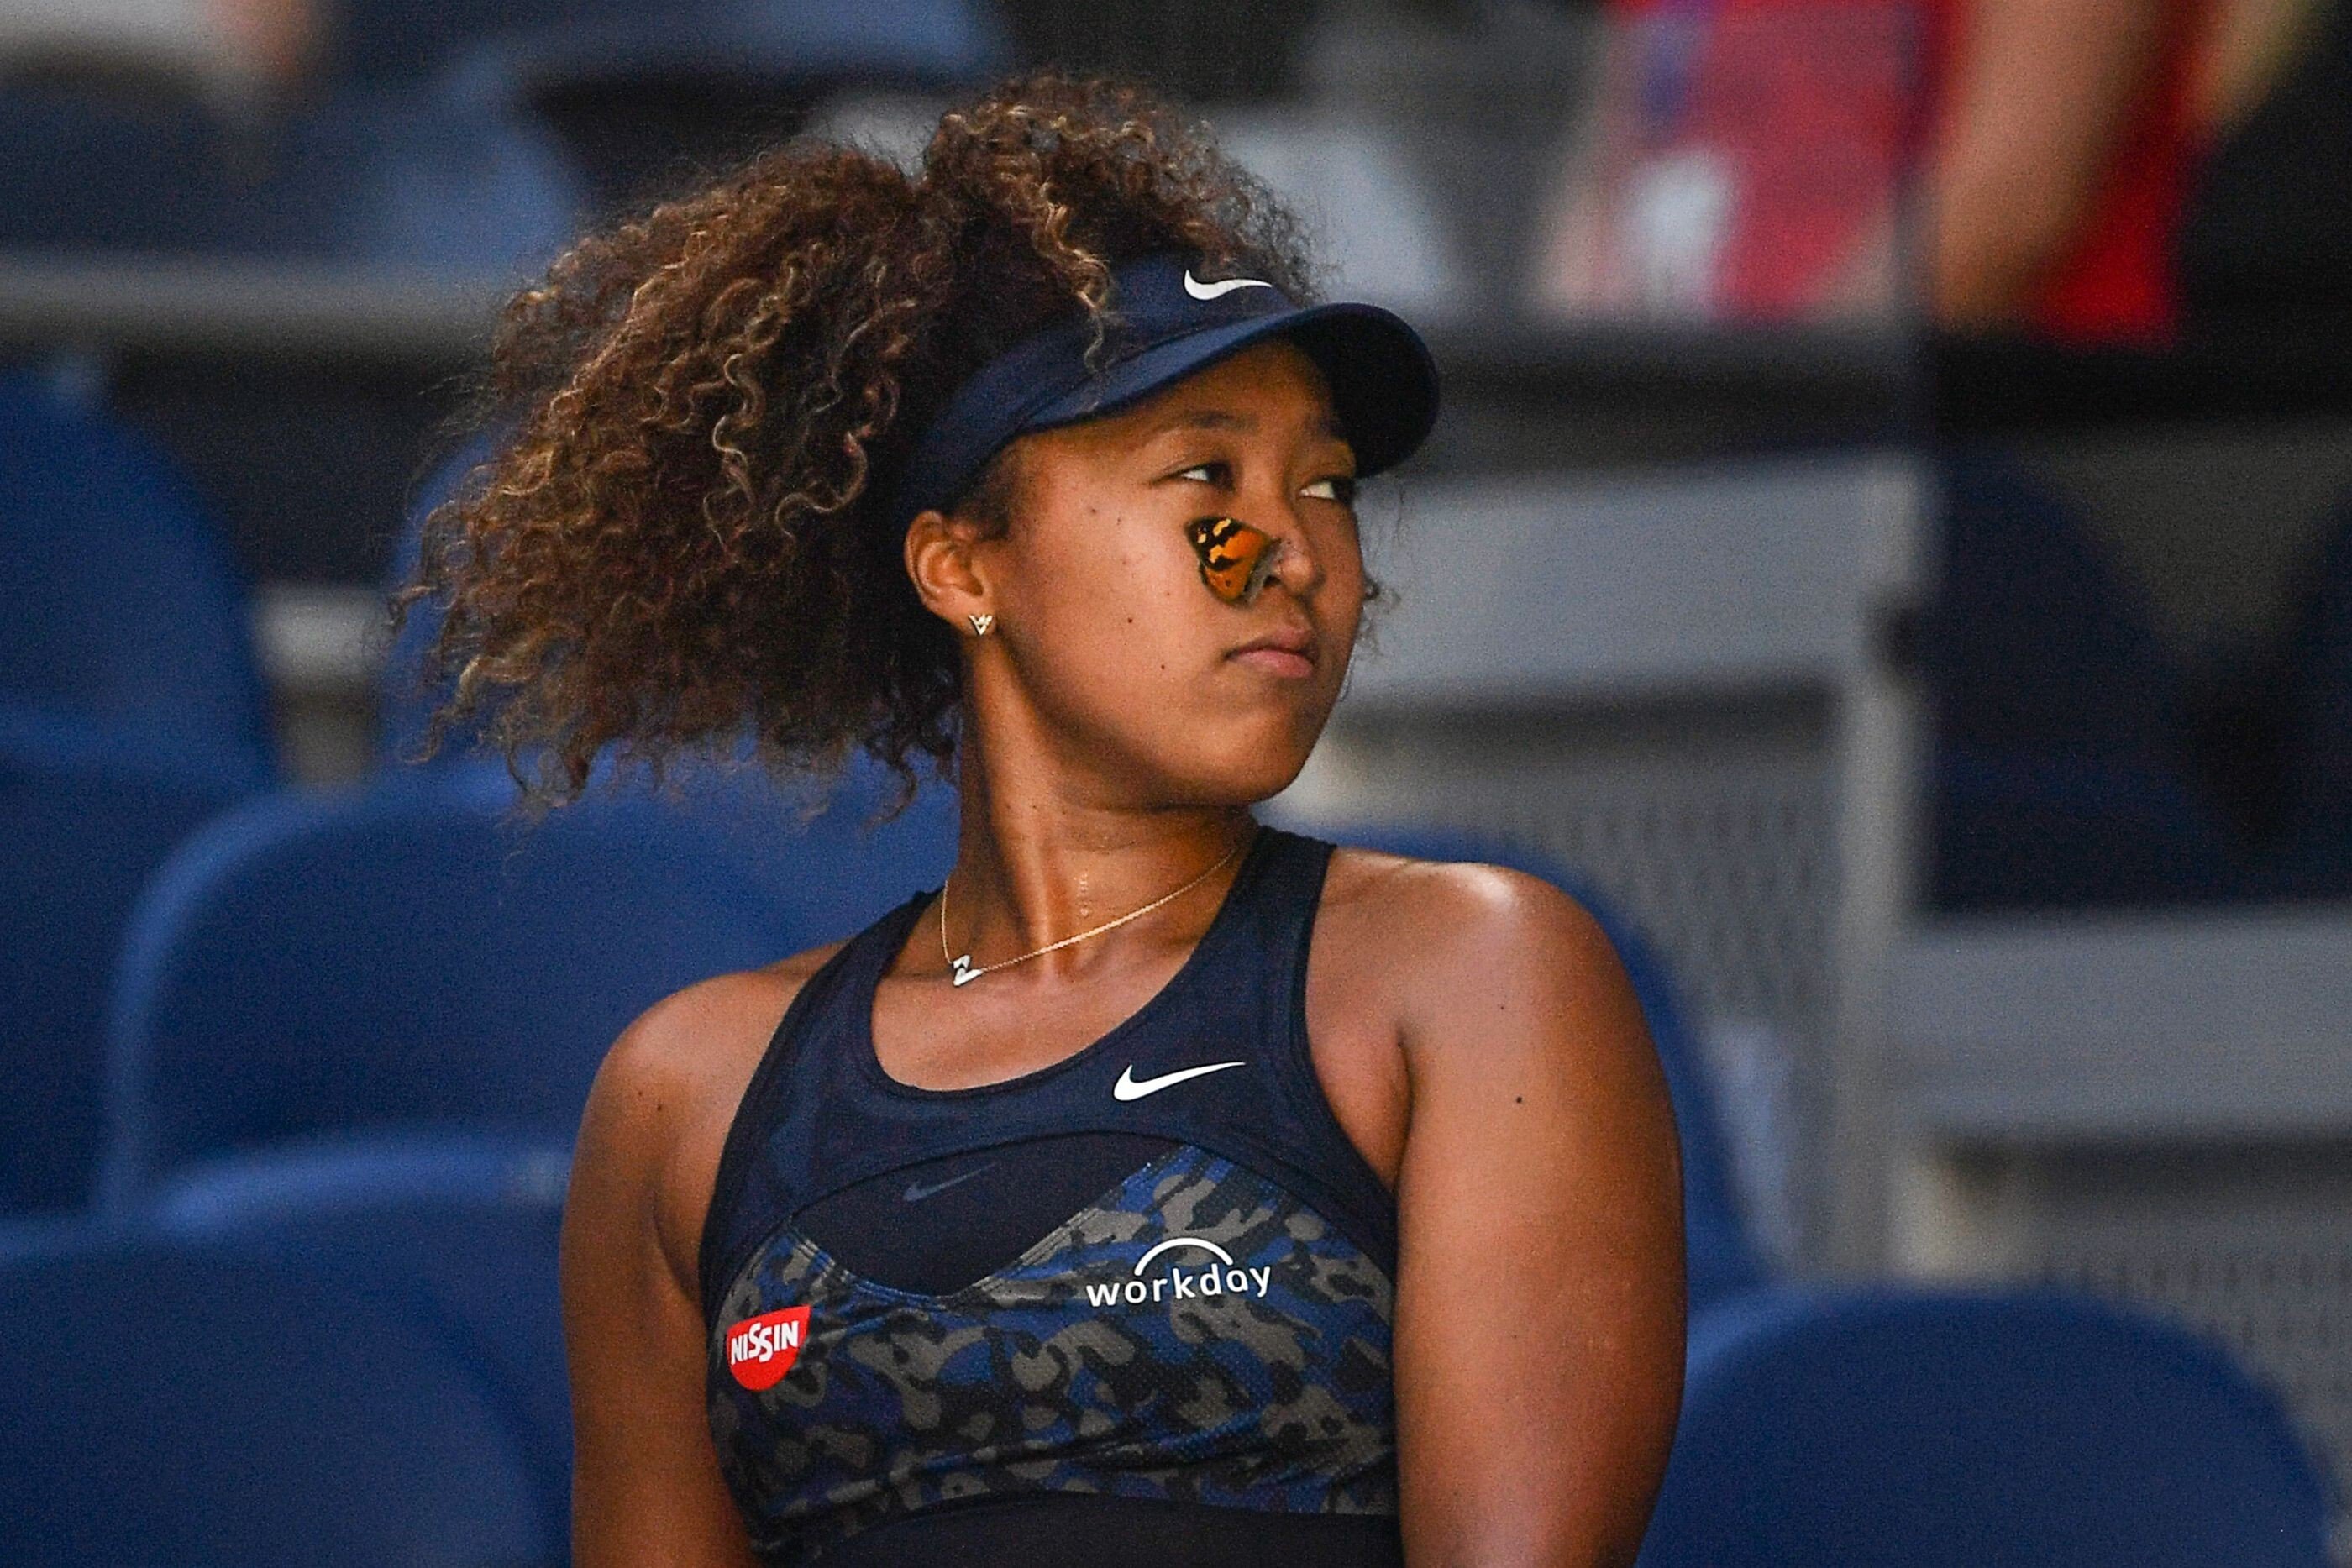 A butterfly lands on Naomi Osaka’s face before she gently carries it to safety during her march to the Australian Open title. Photo: AFP